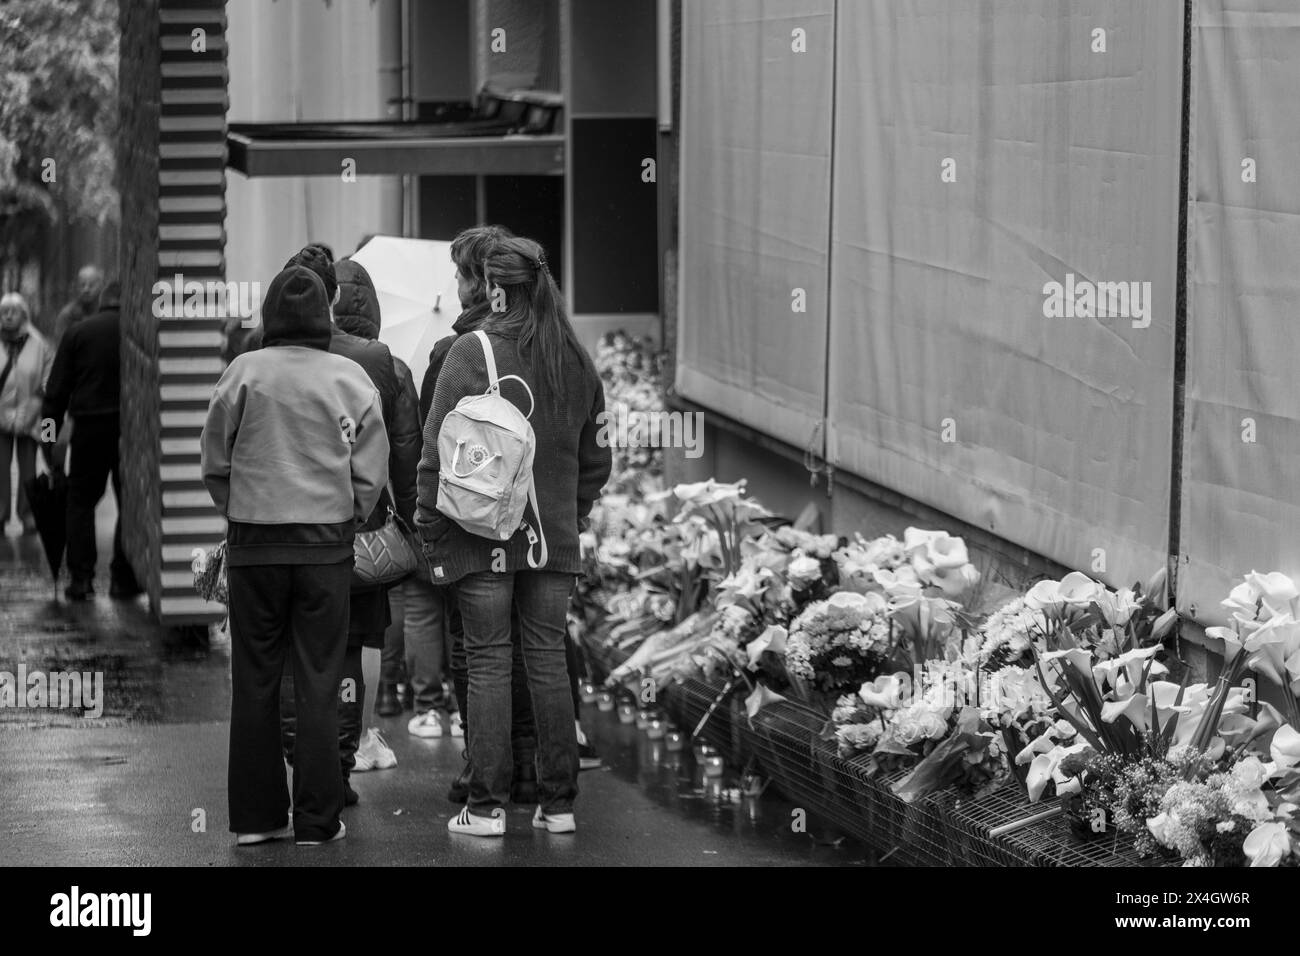 The parents of the children who died exactly one year ago in a shooting at OS Vladislav Ribnikar in Belgrade arrived this morning in front of the school. There they laid flowers and lit candles in memory of the murdered children and the school guard. At 8:41 a.m. sirens sounded in front of the school. At the same time, the media in Serbia stopped the program and observed a minute's silence in honor of those killed. The parents then went to Tasmajdanski Park, the place where the children grew up and played. A video wall was installed there, showing photographs of the victims, in Belgrade, Sebi Stock Photo